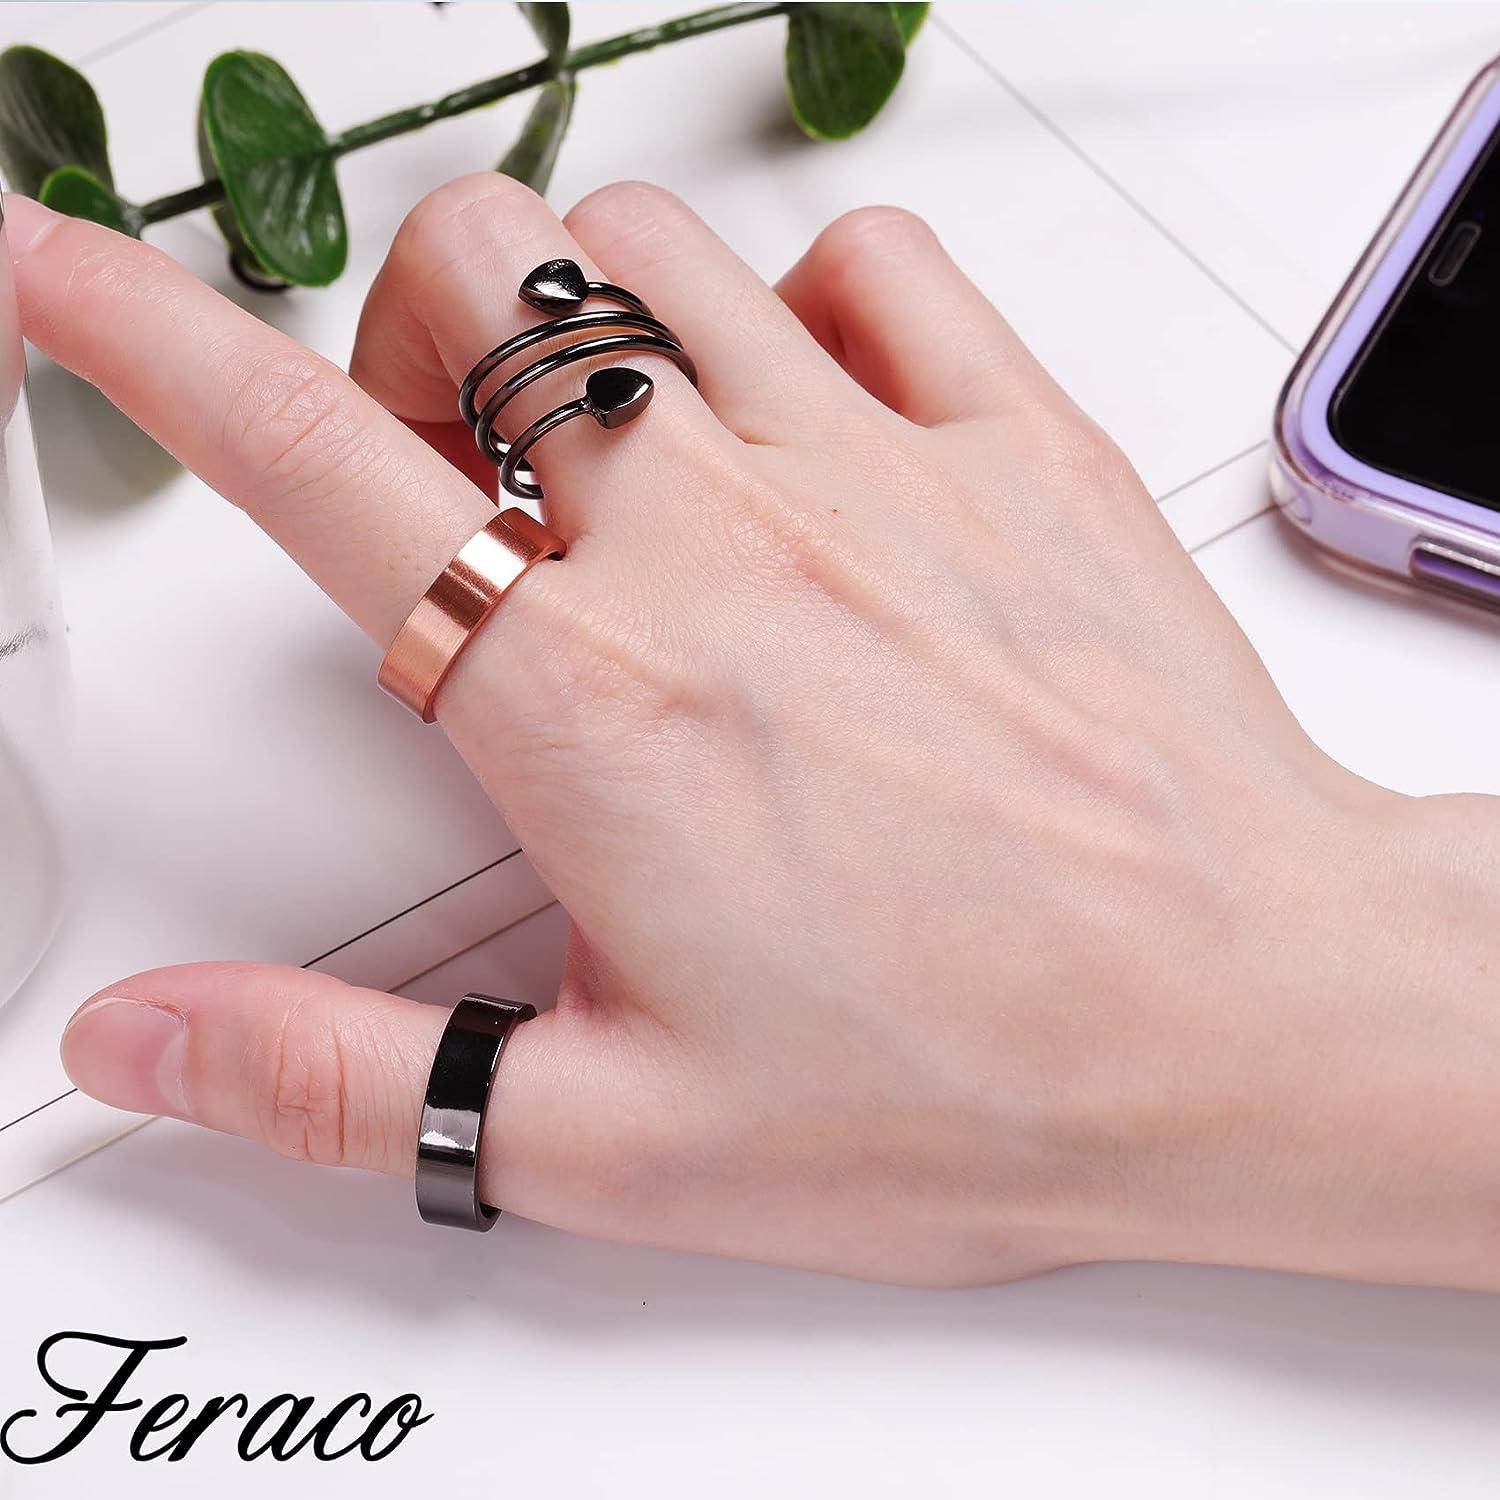 Brass Silver Plated Spiral Adjustable Size Fashion Finger Ring Women Girls  at Rs 10 in Jaipur